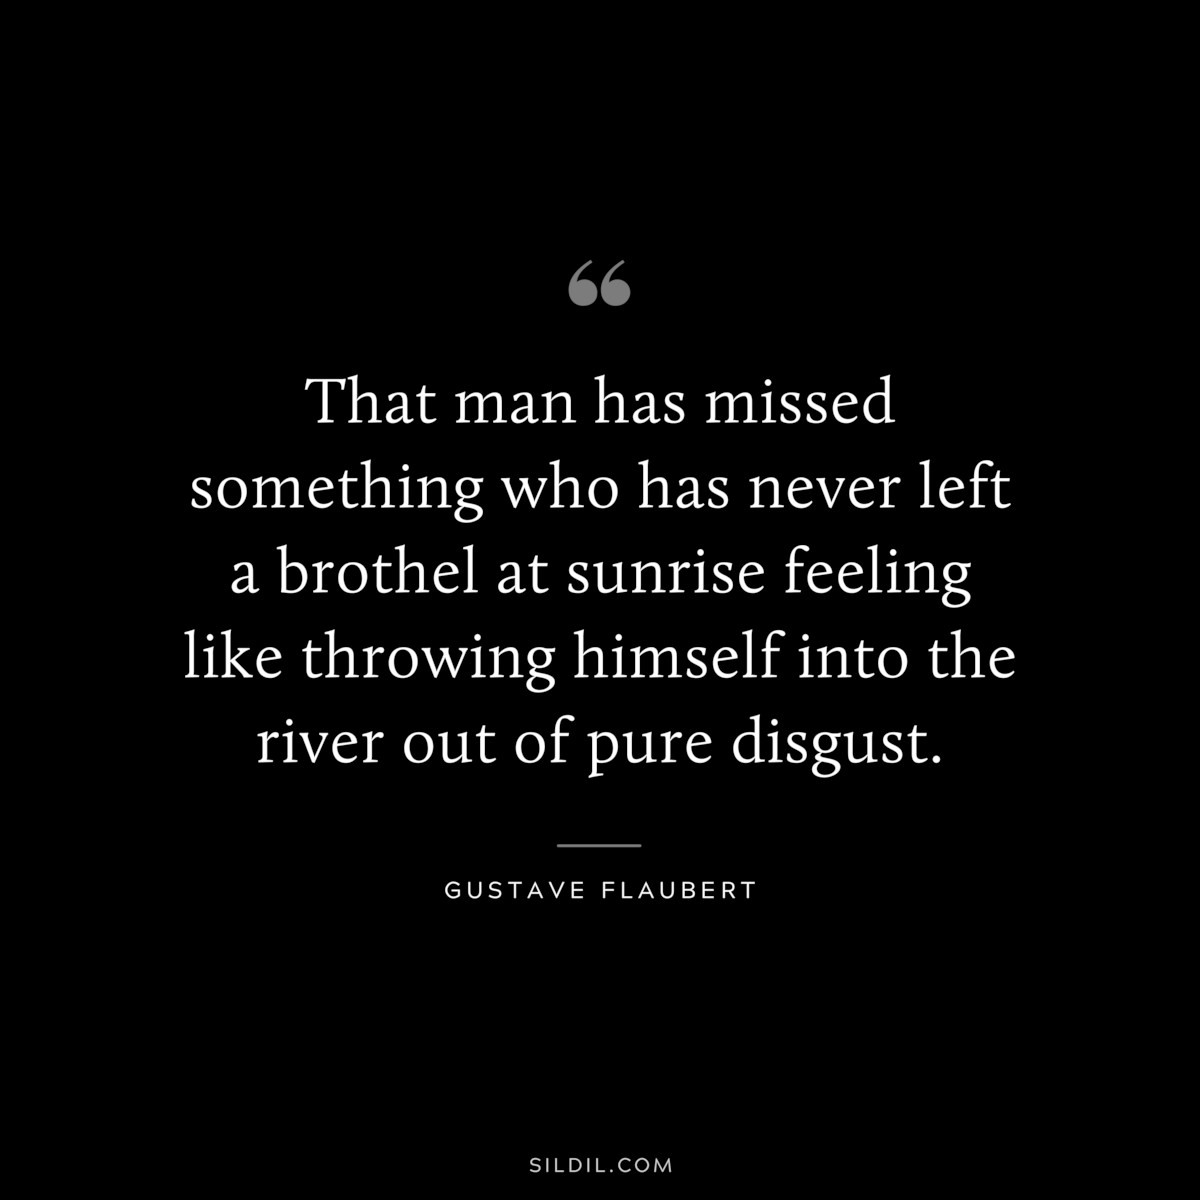 That man has missed something who has never left a brothel at sunrise feeling like throwing himself into the river out of pure disgust. ― Gustave Flaubert